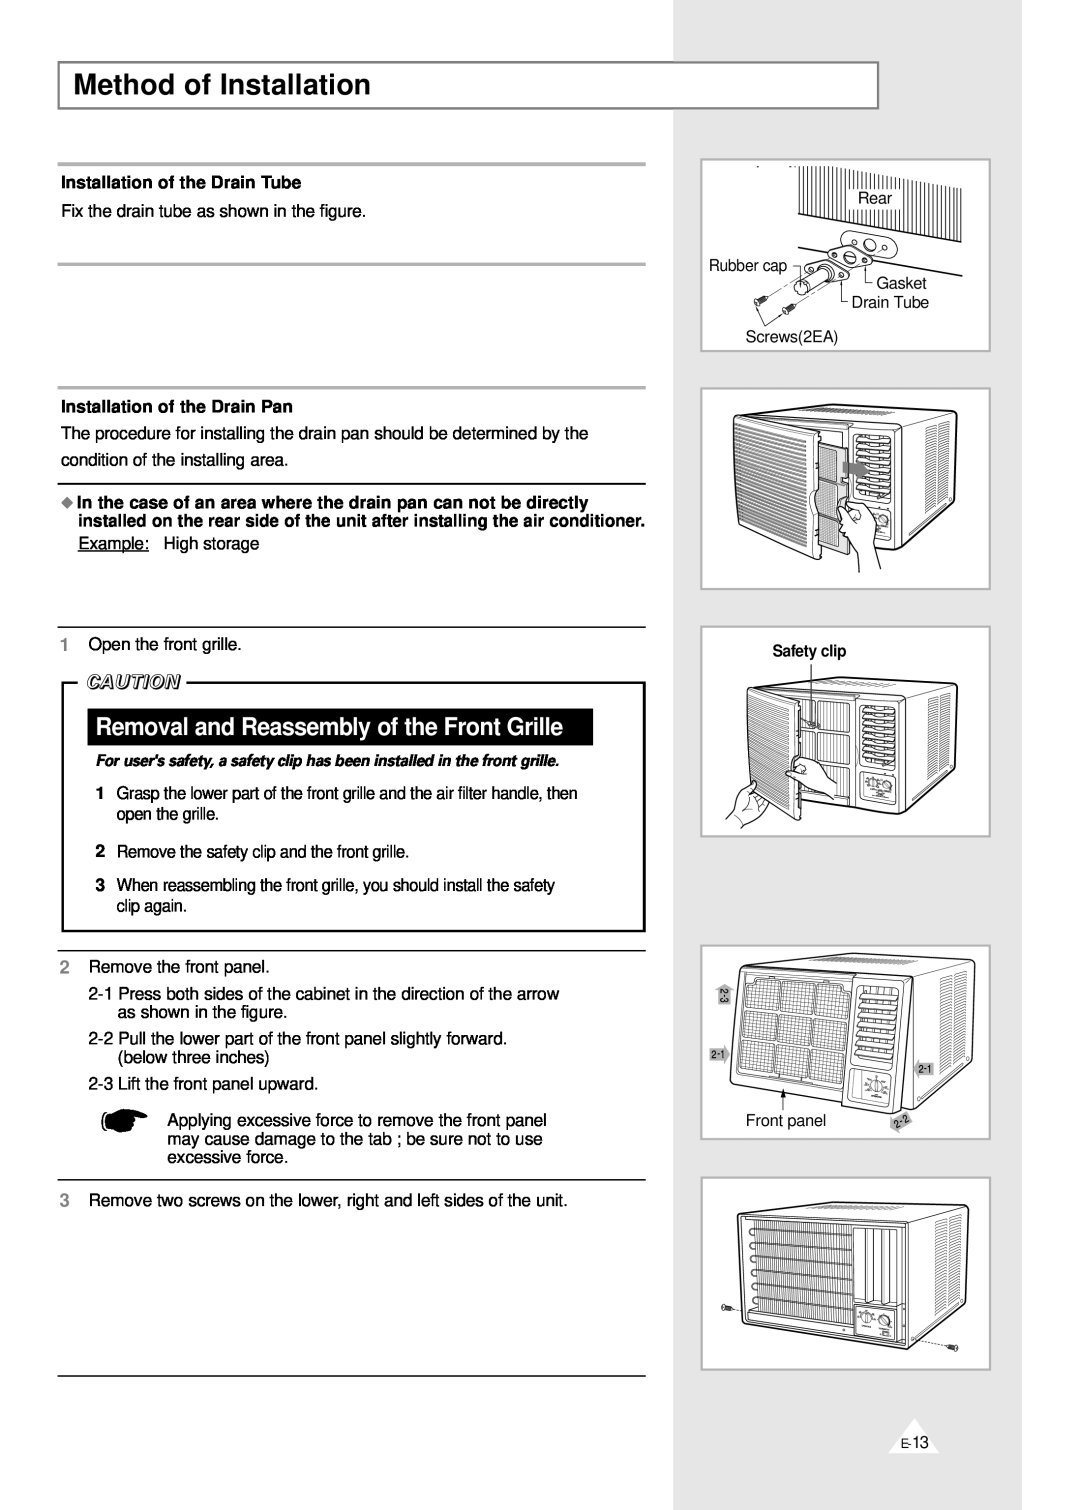 Samsung AWT20F1MB manual Method of Installation, Removal and Reassembly of the Front Grille, Installation of the Drain Tube 